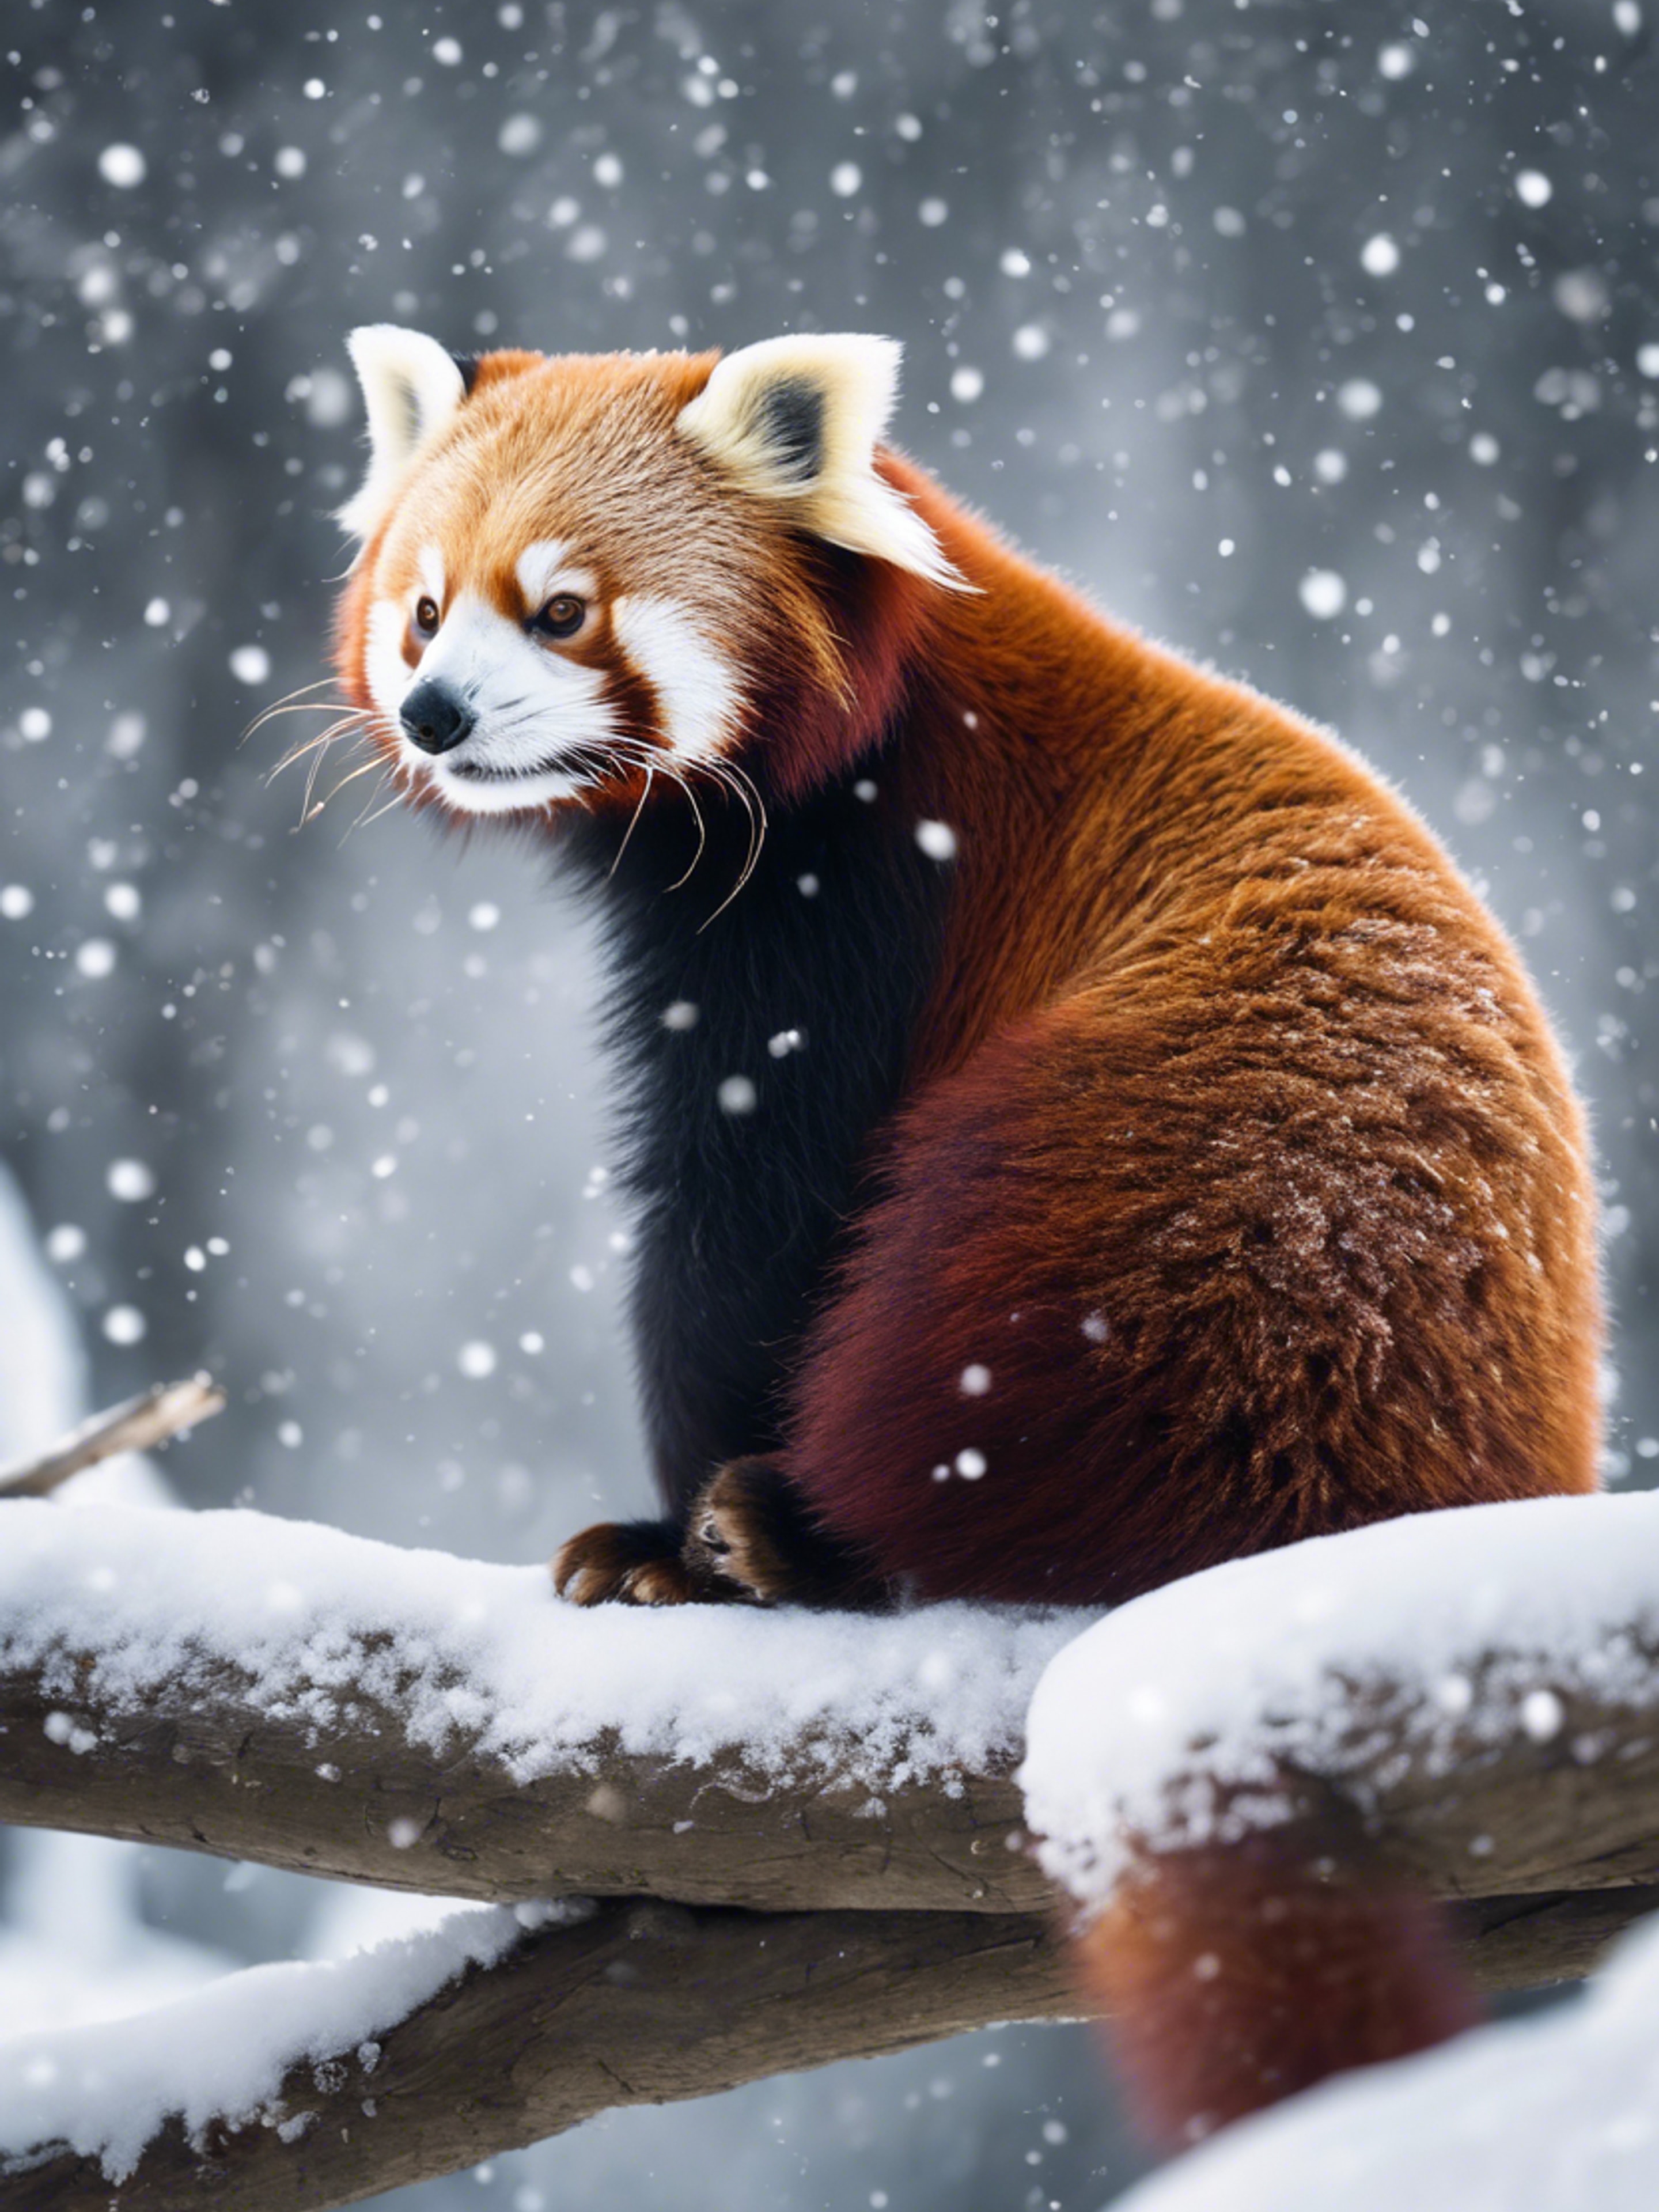 A red panda in winter, its fur looking extra striking against the snow.壁紙[00977545189243e2b3f0]